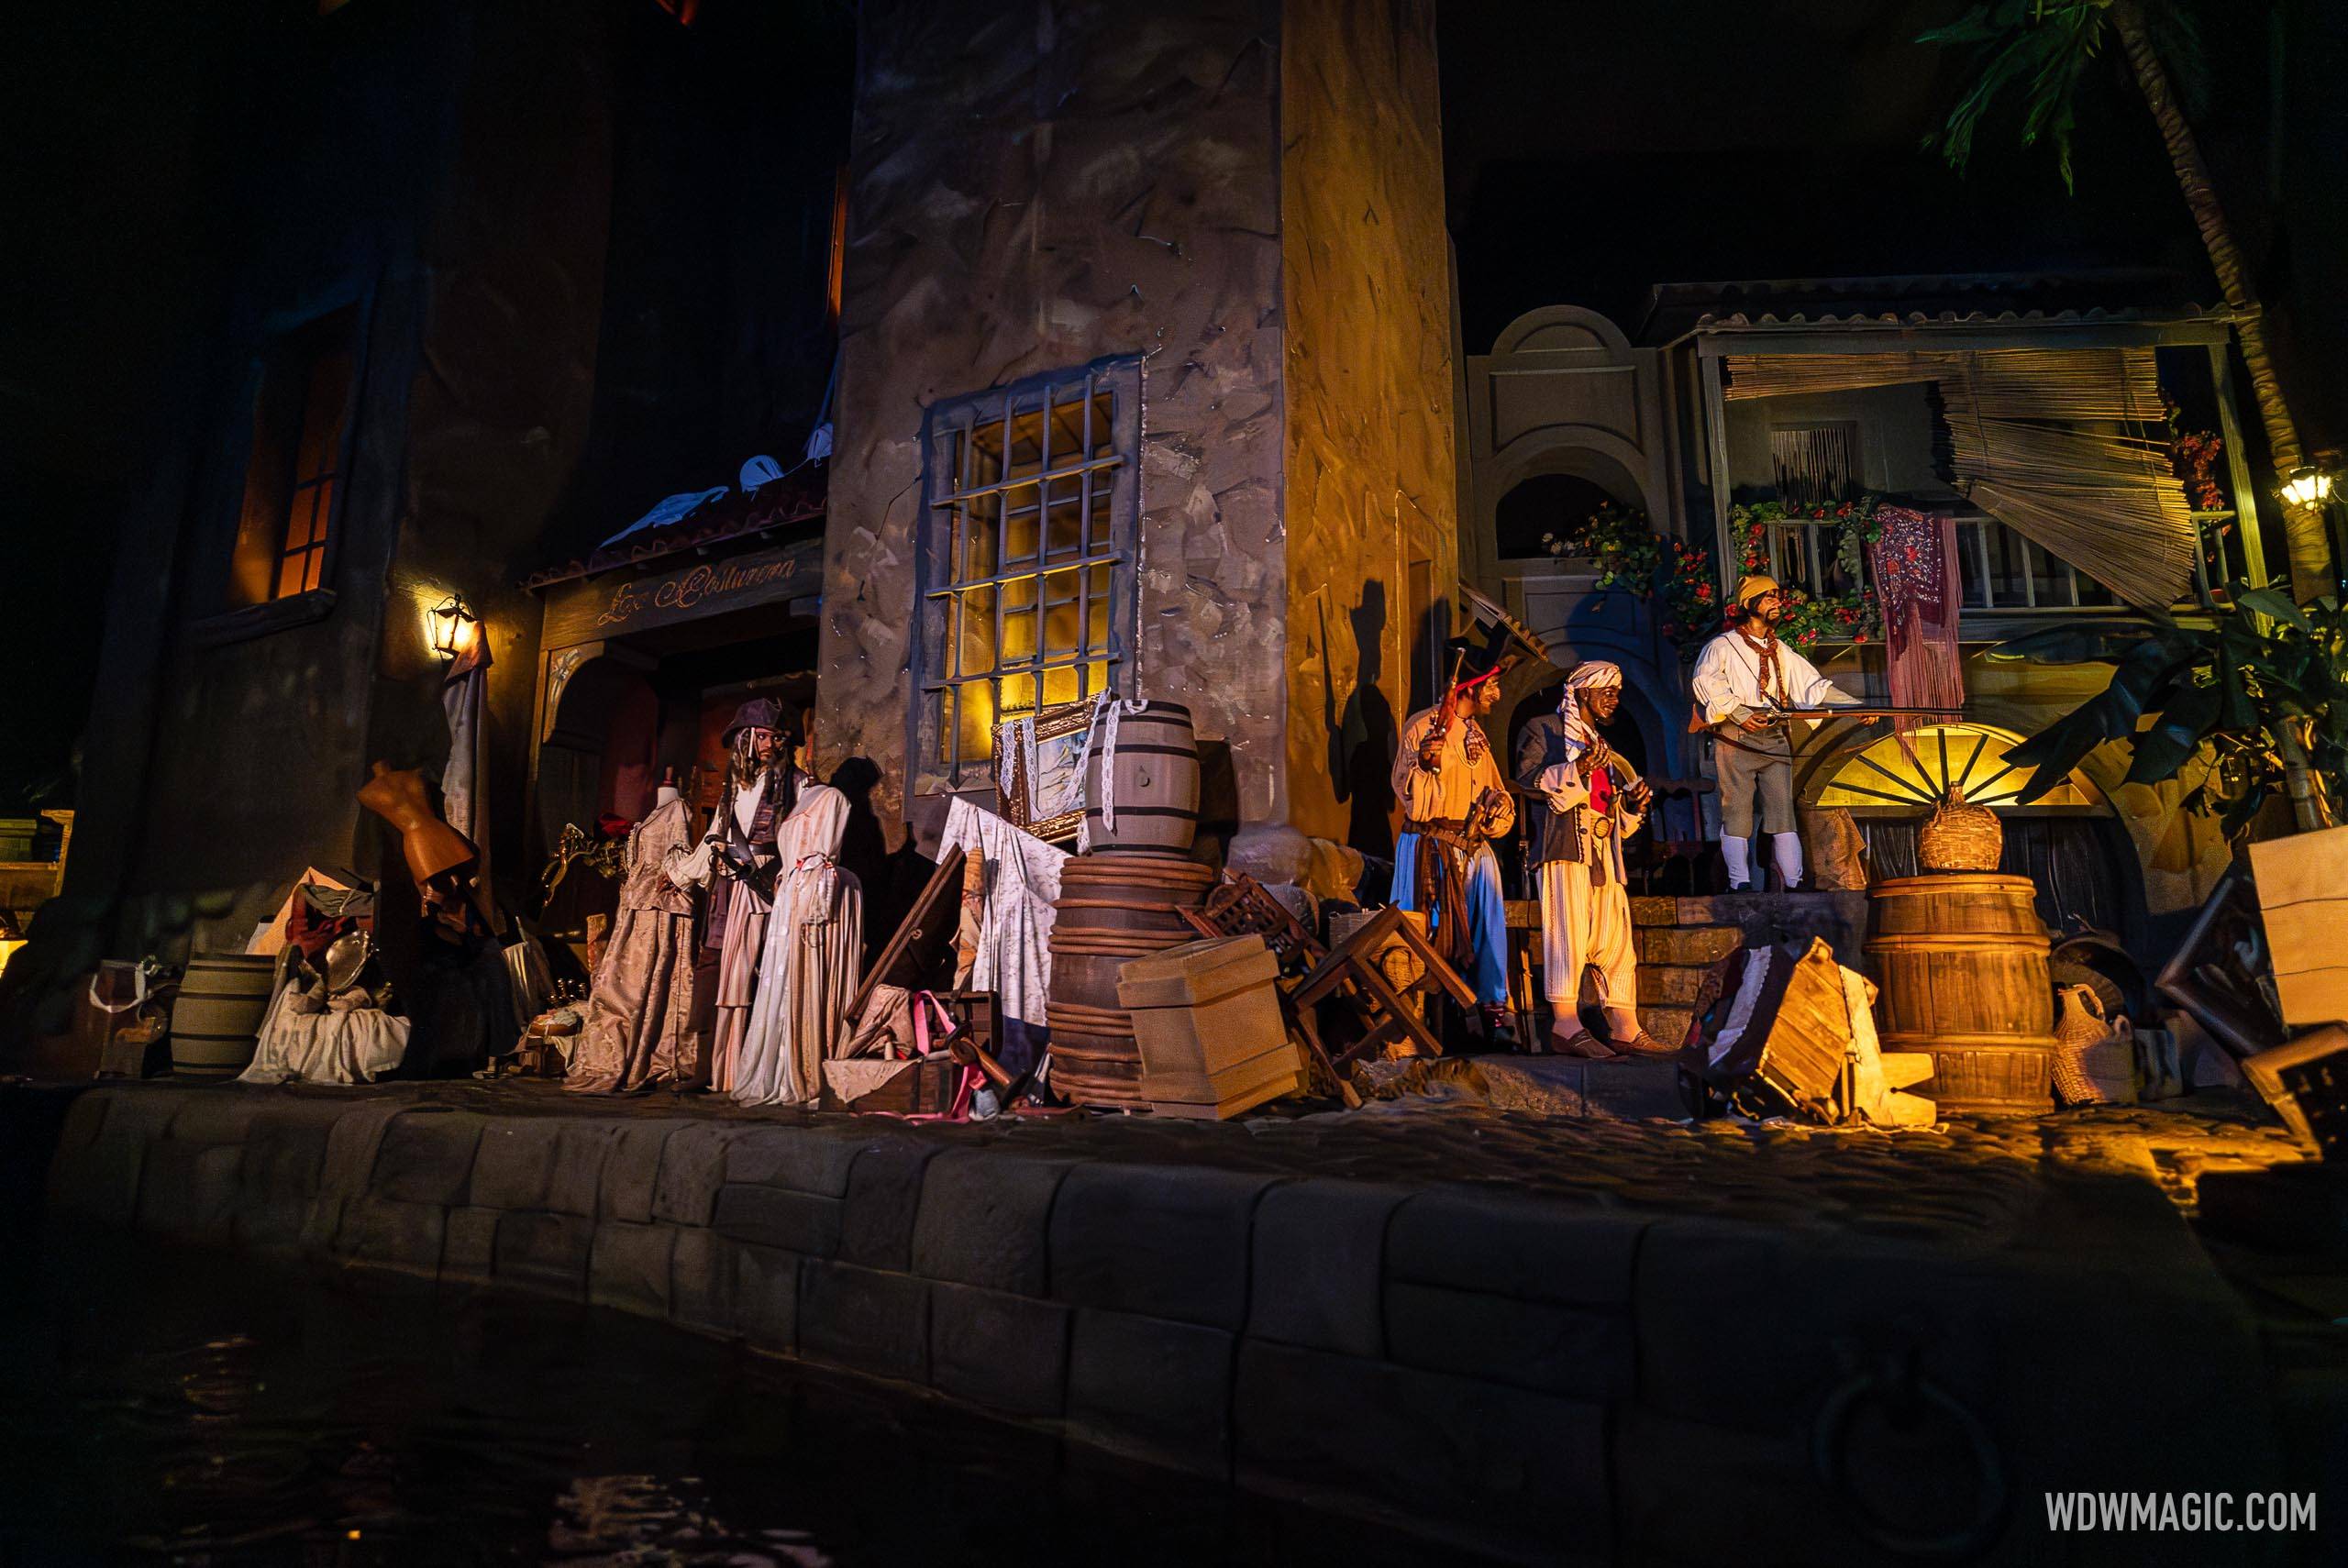 Pirates of the Caribbean expected to close for an extensive refurbishment later this year